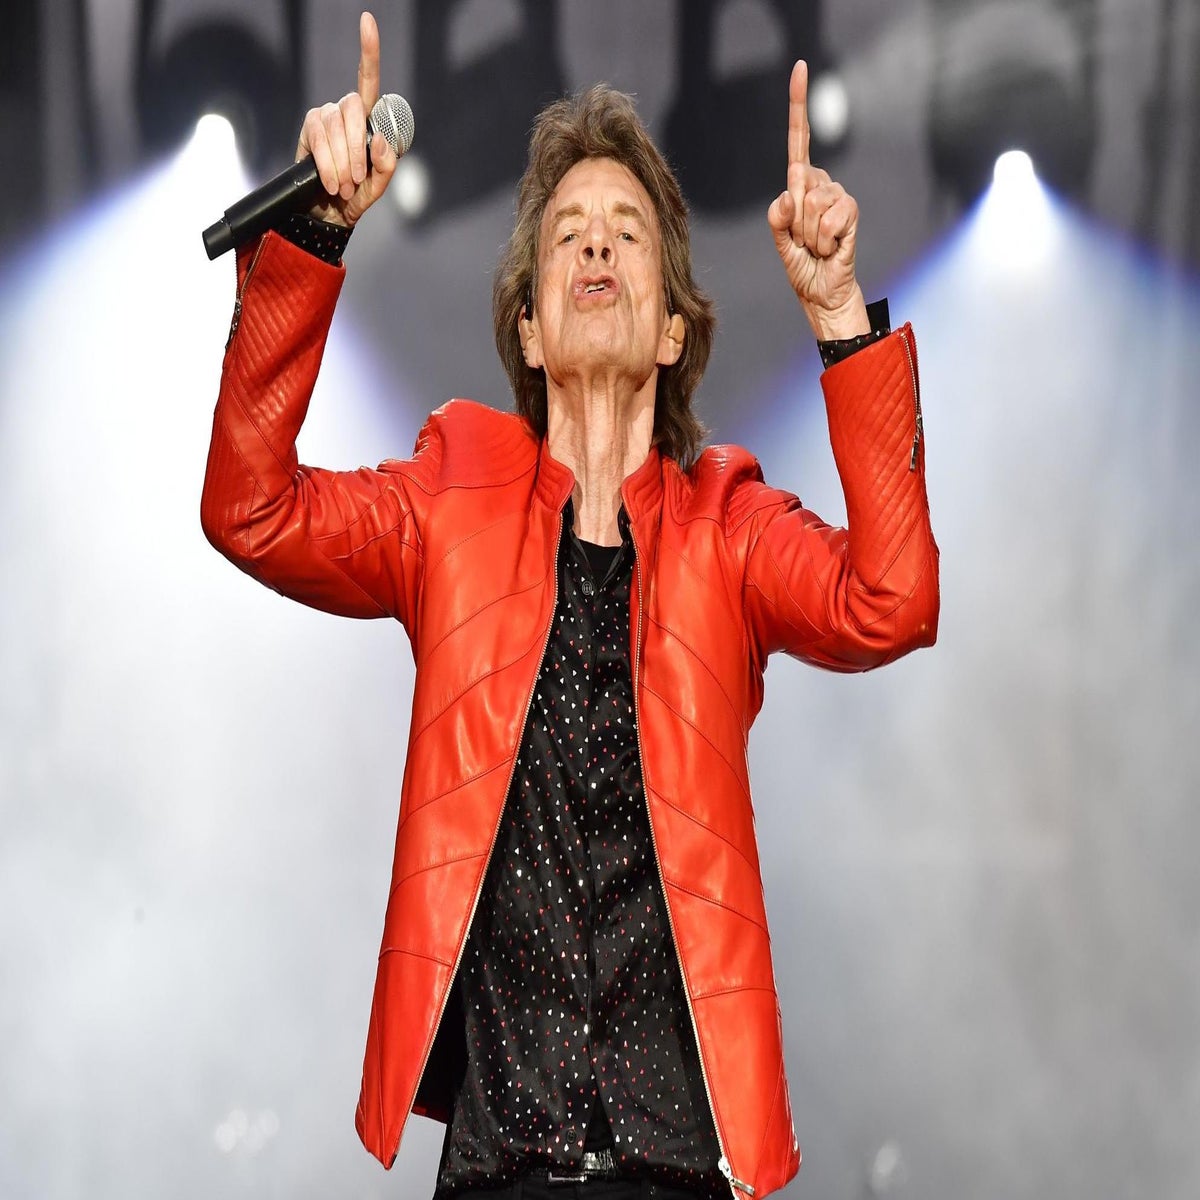 tour Jagger Rolling The back his dates The | | Mick announce Stones \'heart Independent after rescheduled The feet Independent gets surgery\' on as